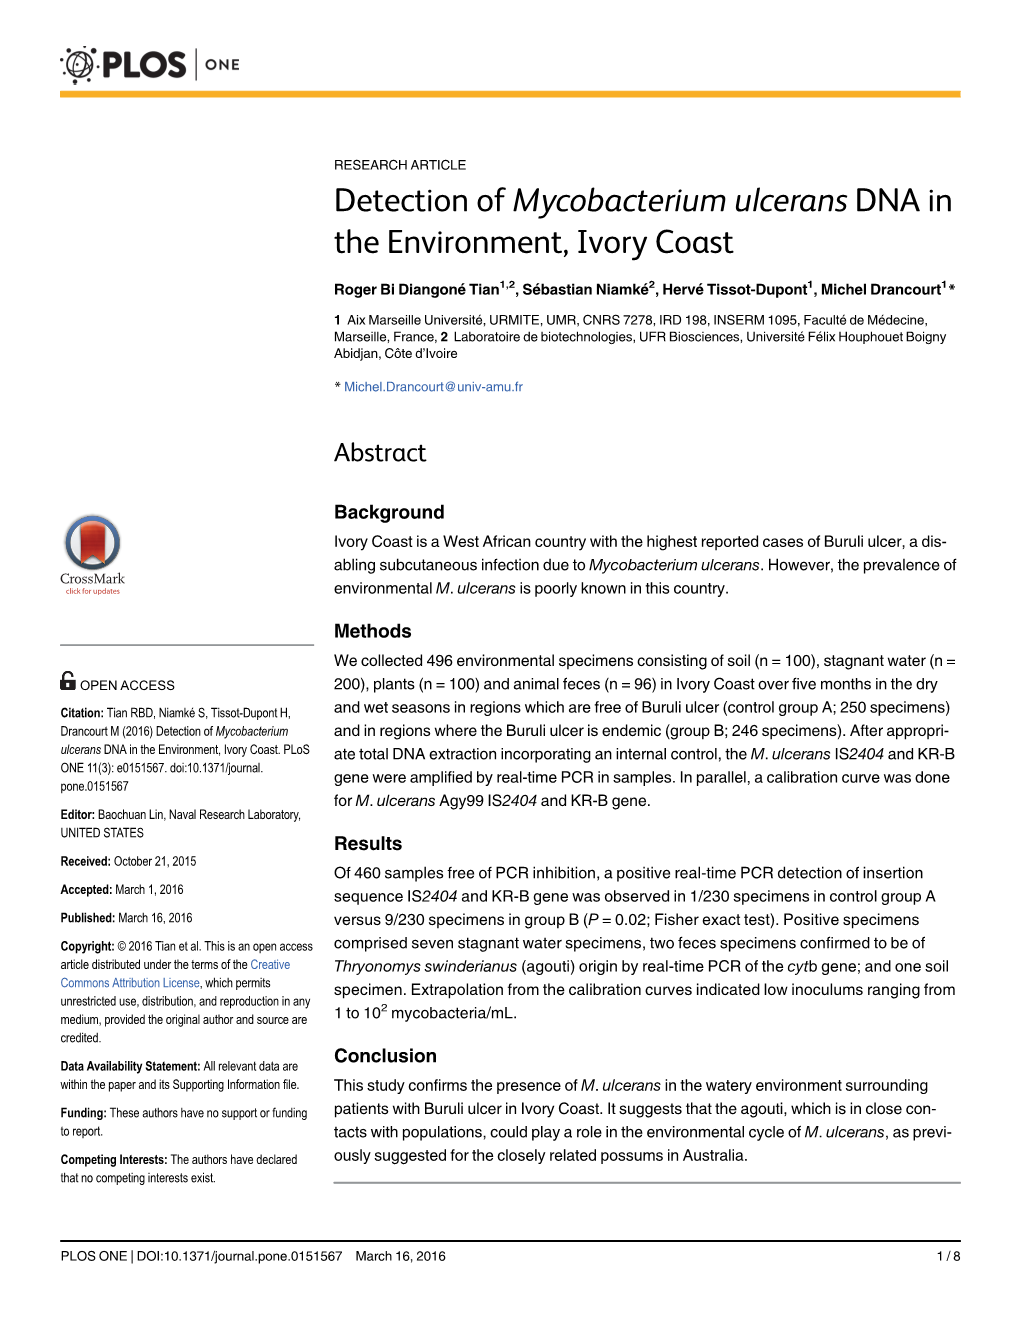 Detection of Mycobacterium Ulcerans DNA in the Environment, Ivory Coast